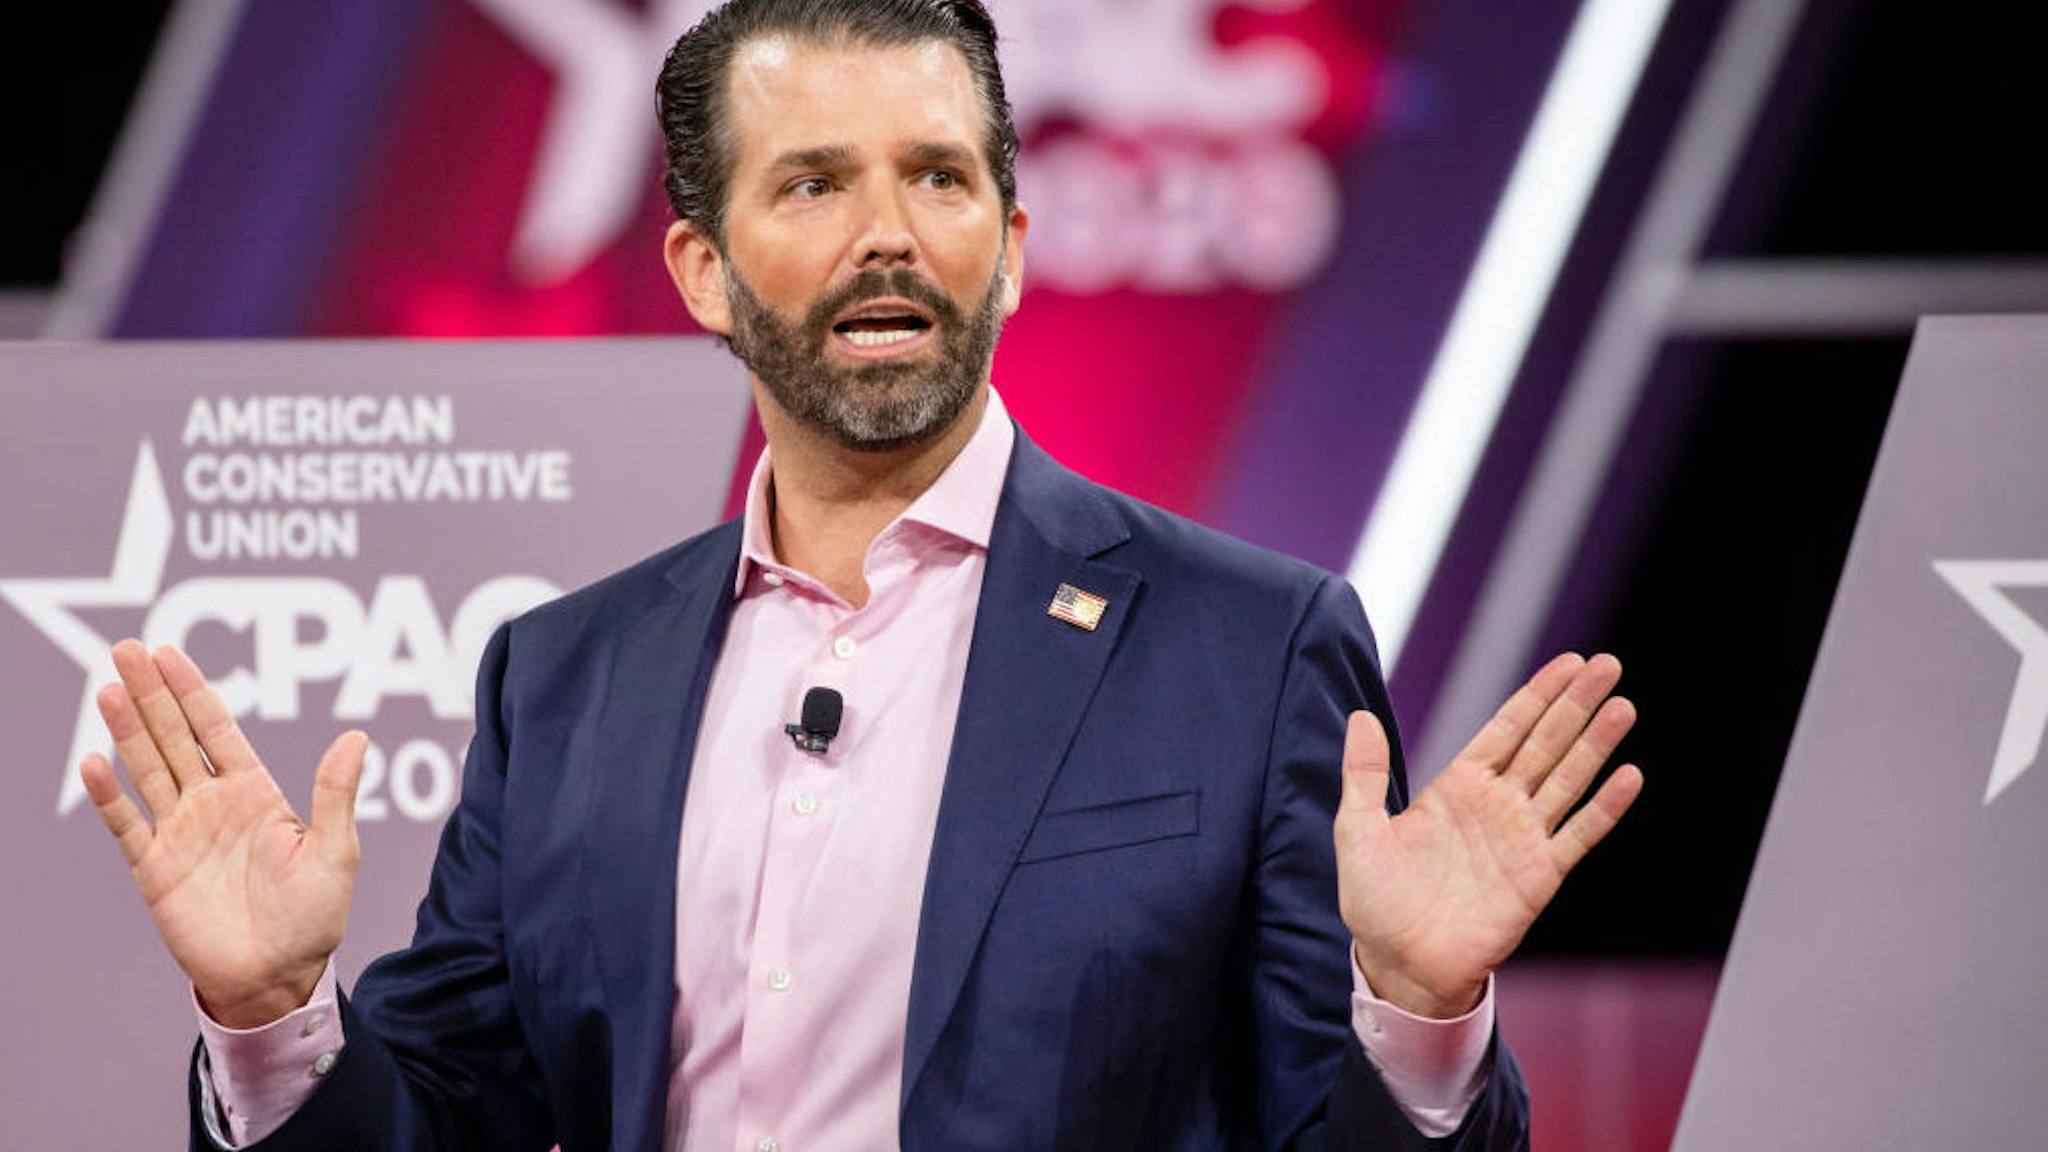 Donald Trump Jr., son of President Donald Trump, speaks on stage during the Conservative Political Action Conference 2020 (CPAC) hosted by the American Conservative Union on February 28, 2020 in National Harbor, MD. (